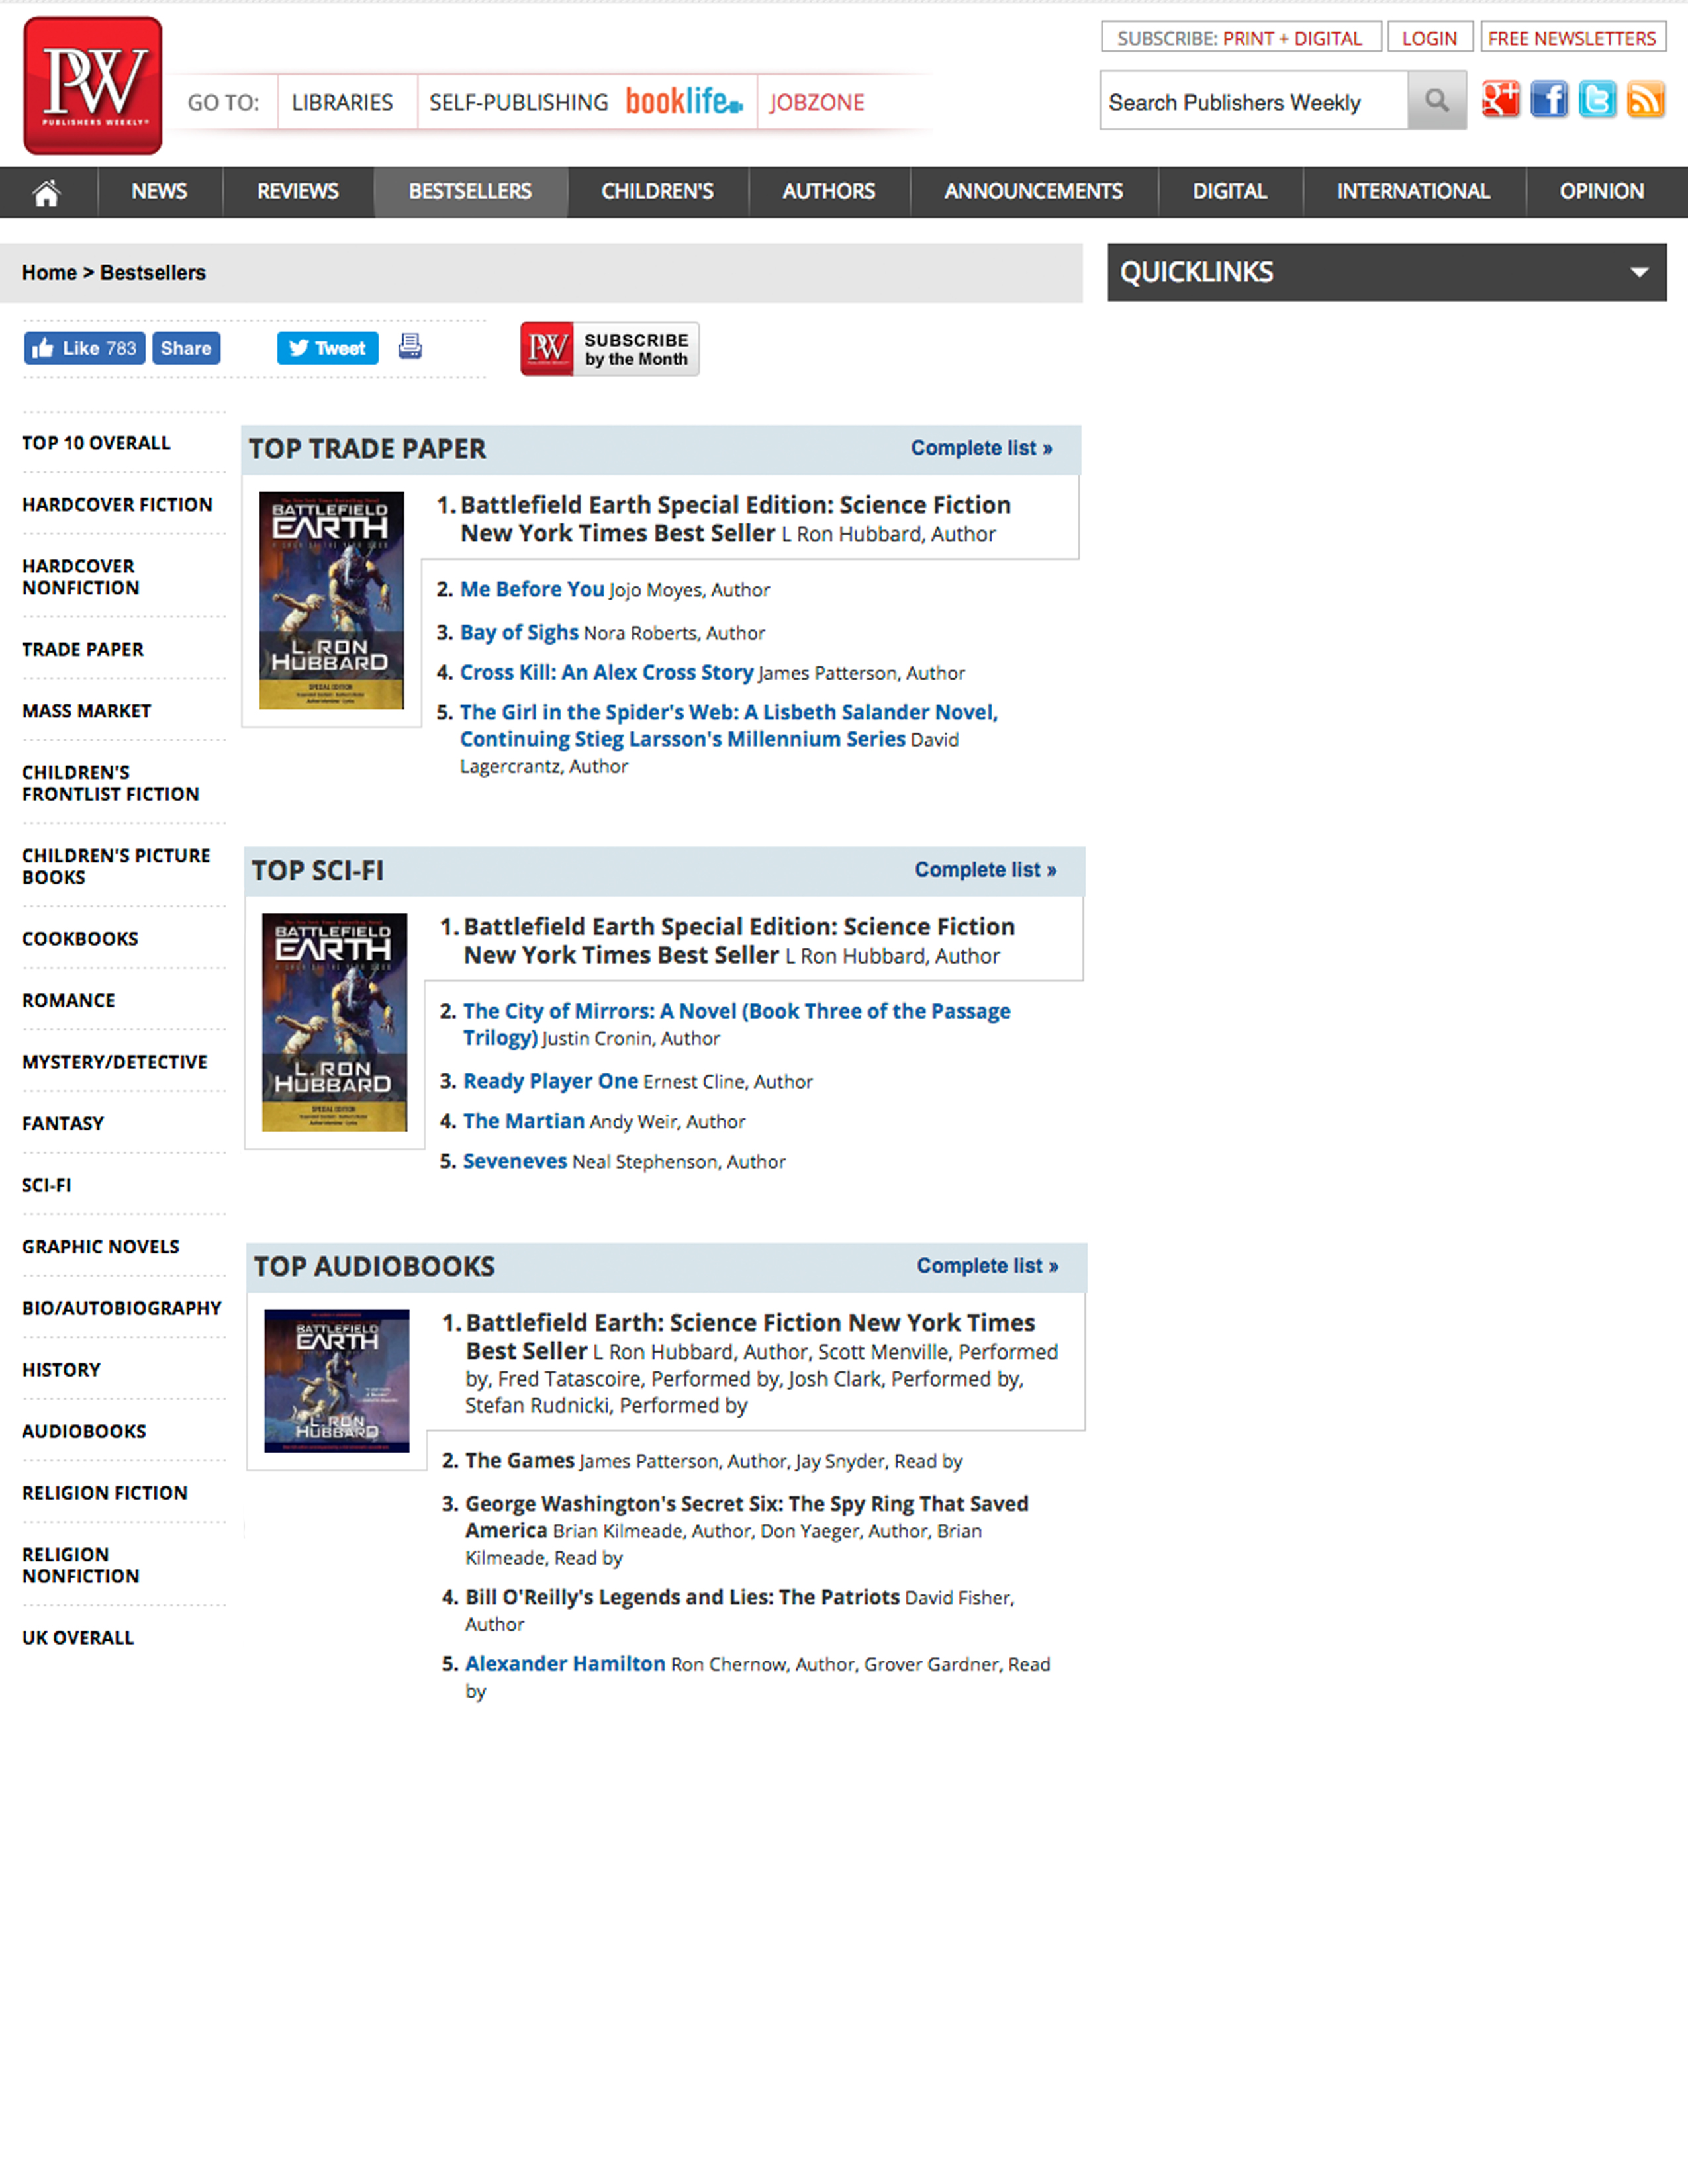 Battlefield Earth: #1 Paperback, #1 Audiobook, #1 Science Fiction, as reported by Publishers Weekly